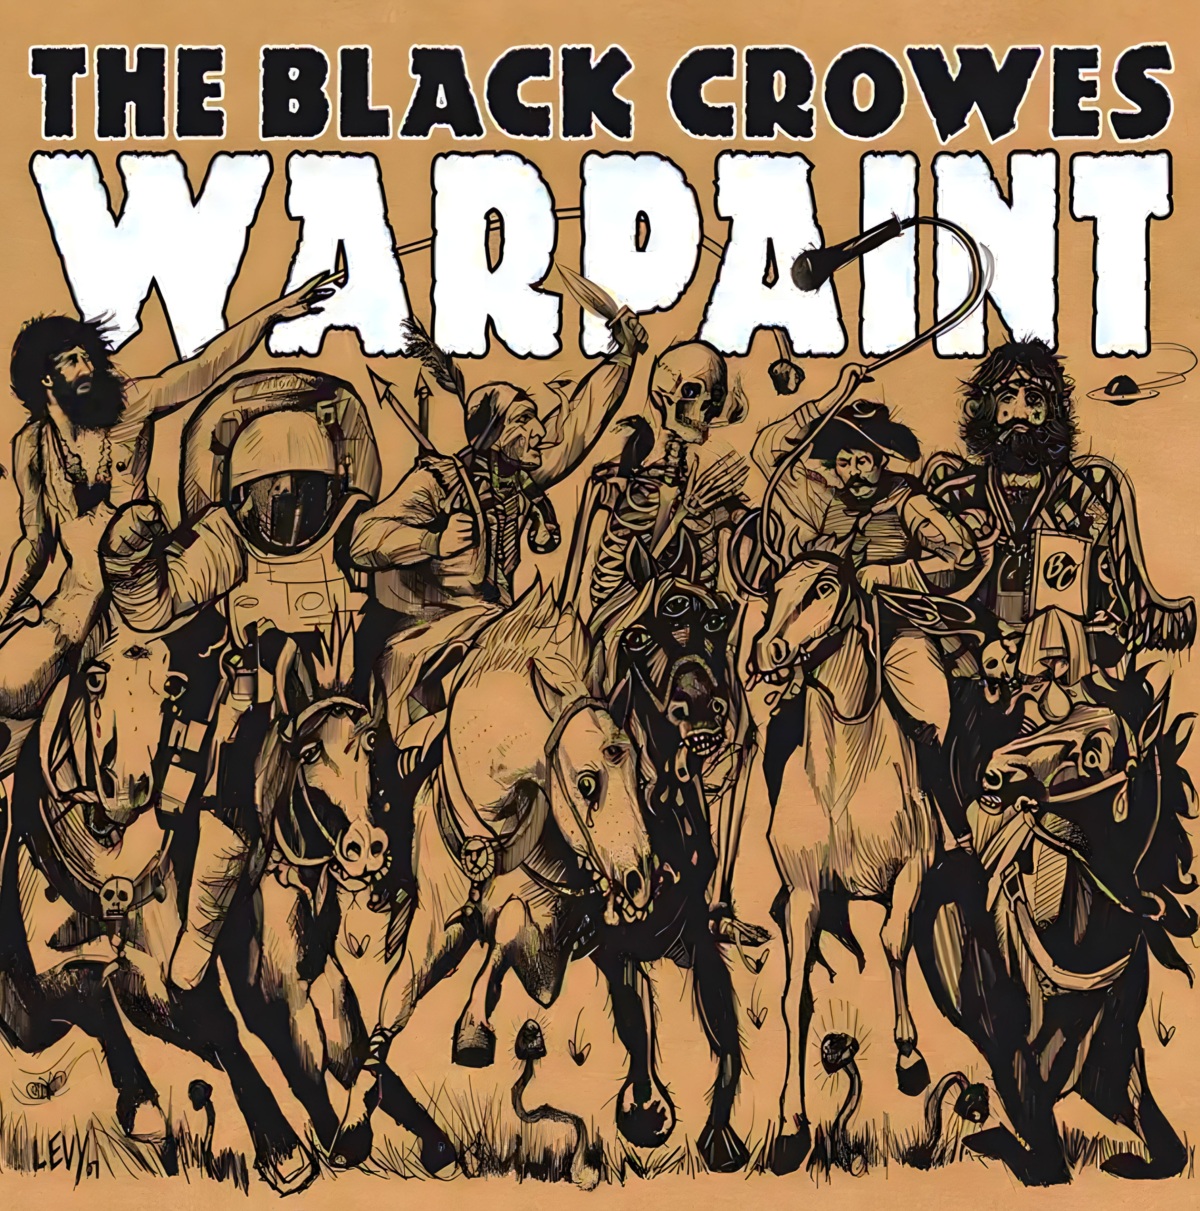 ‘Warpaint’ Bridges a Gap Between the Past and Present for The Black Crowes | Album Review